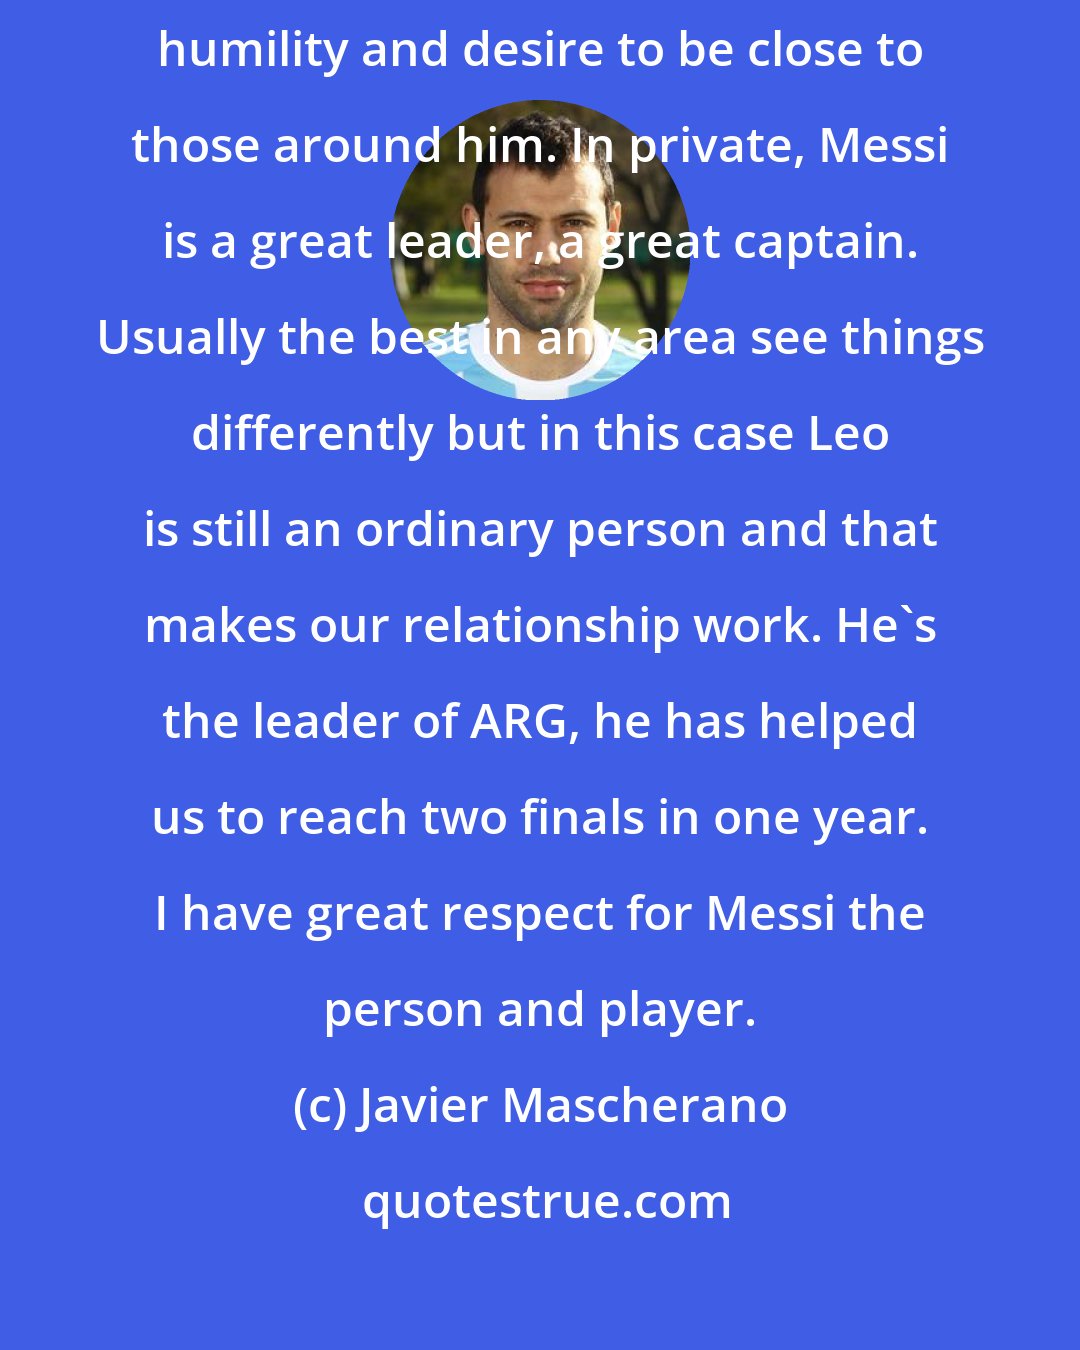 Javier Mascherano: It's not easy, being the best at what he does but still having the humility and desire to be close to those around him. In private, Messi is a great leader, a great captain. Usually the best in any area see things differently but in this case Leo is still an ordinary person and that makes our relationship work. He's the leader of ARG, he has helped us to reach two finals in one year. I have great respect for Messi the person and player.